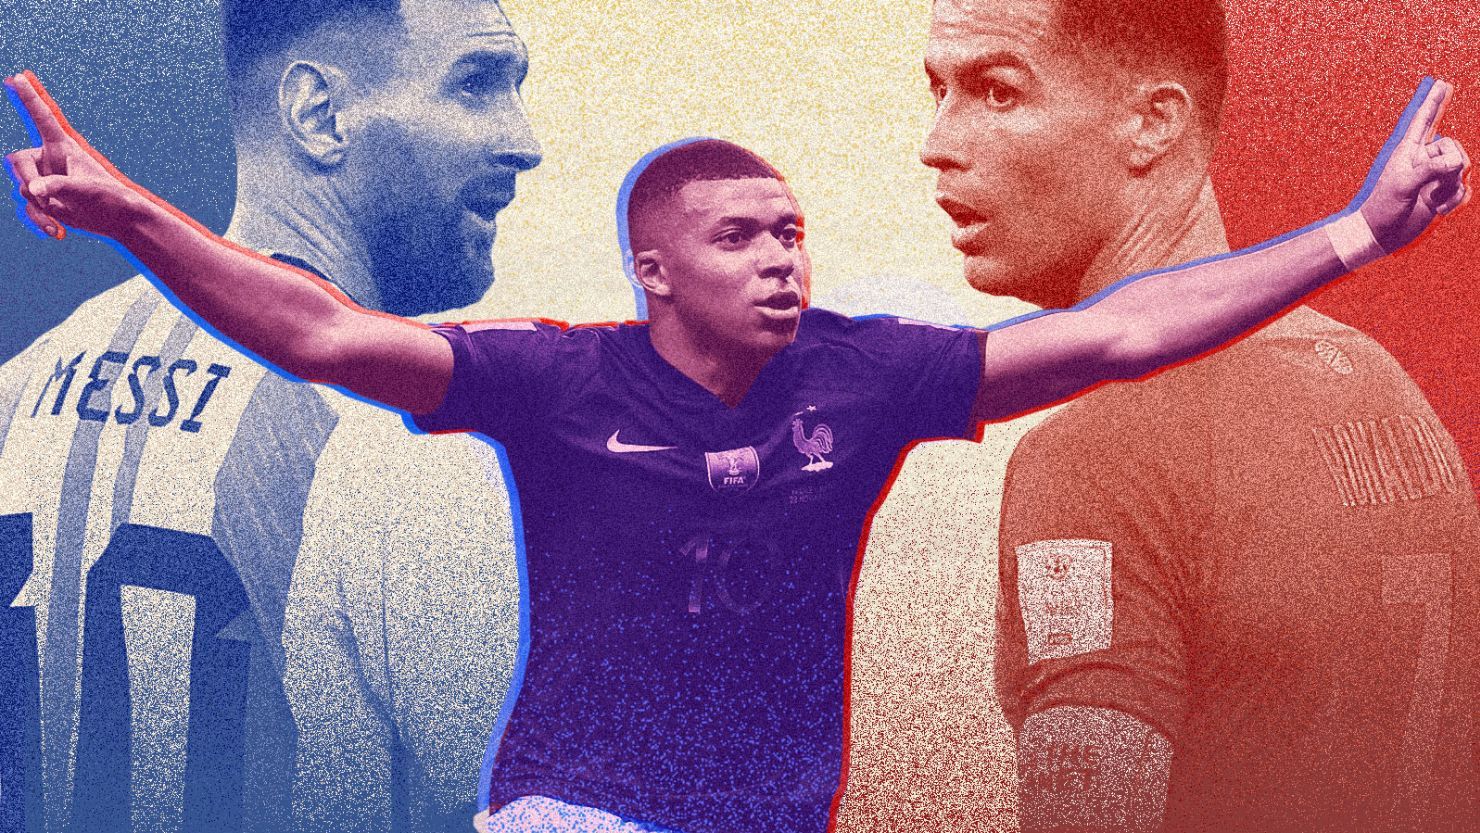  Mbappé Hintergrundbild 1480x833. Kylian Mbappé: Why the 'unstoppable' star now wears the crown as world's best player